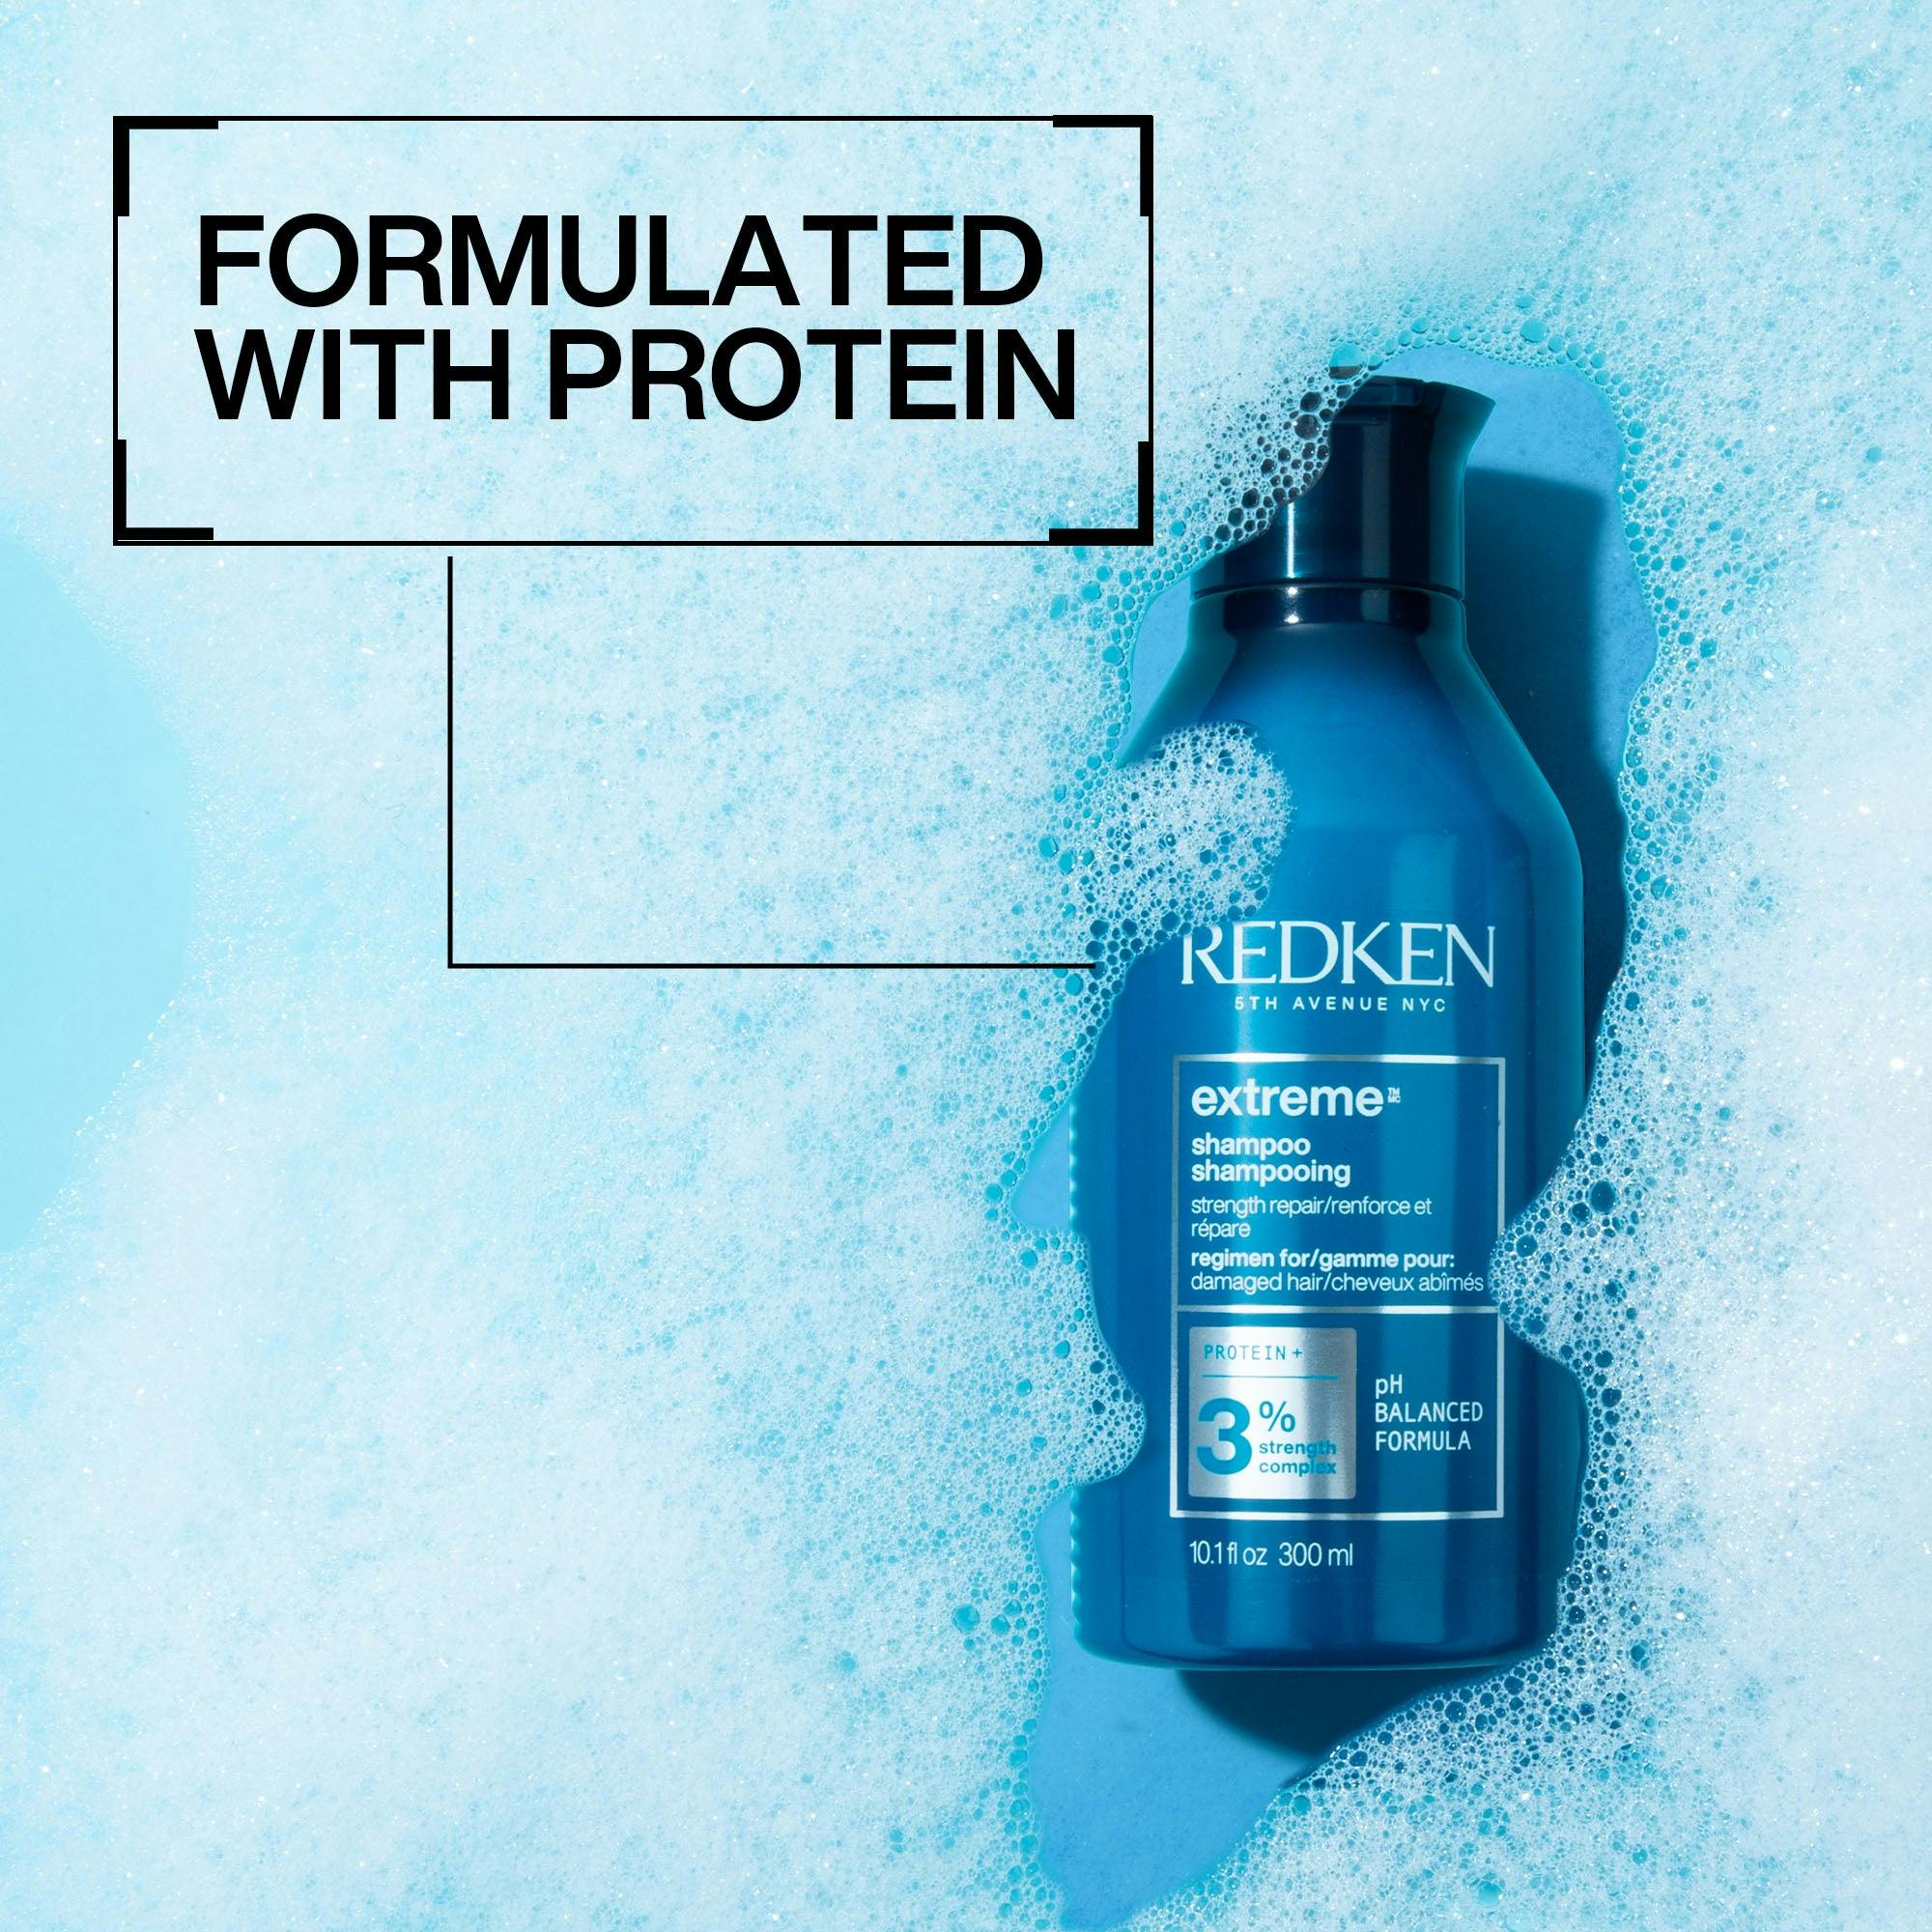 Redken Extreme Strengthening Shampoo and Conditioner 500ml Bundle